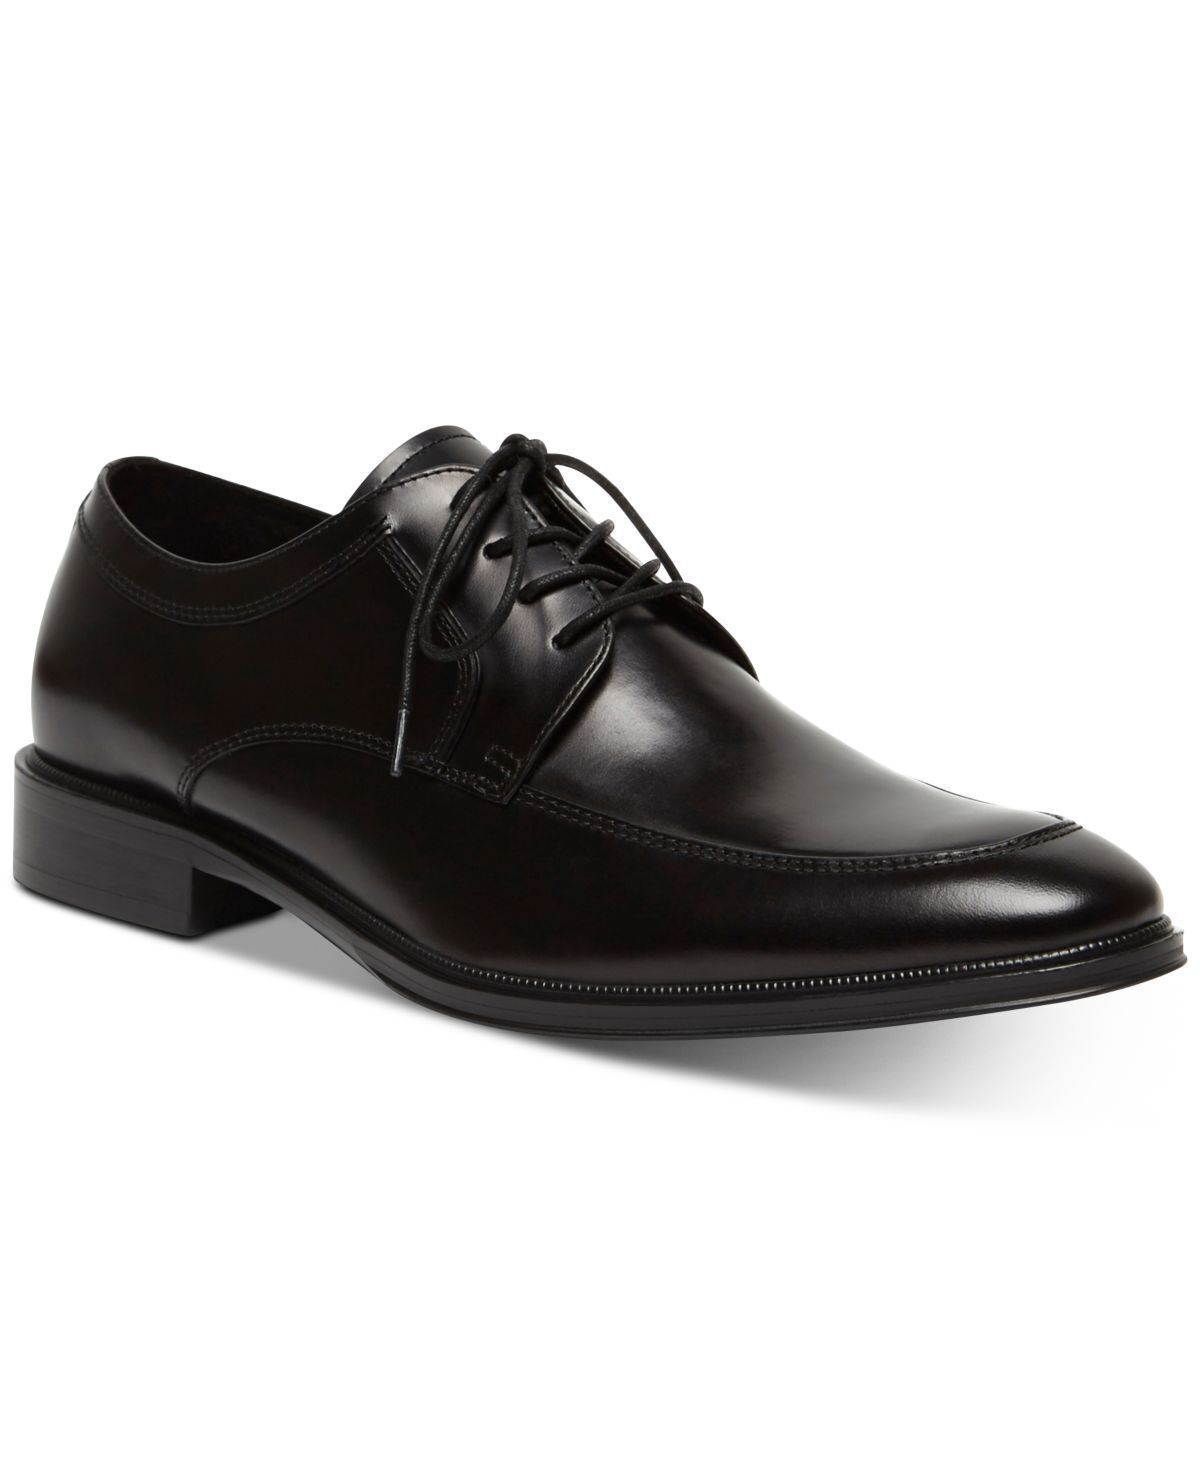 Primary image for Kenneth Cole New York Mens Tully Oxfords,Black,8M